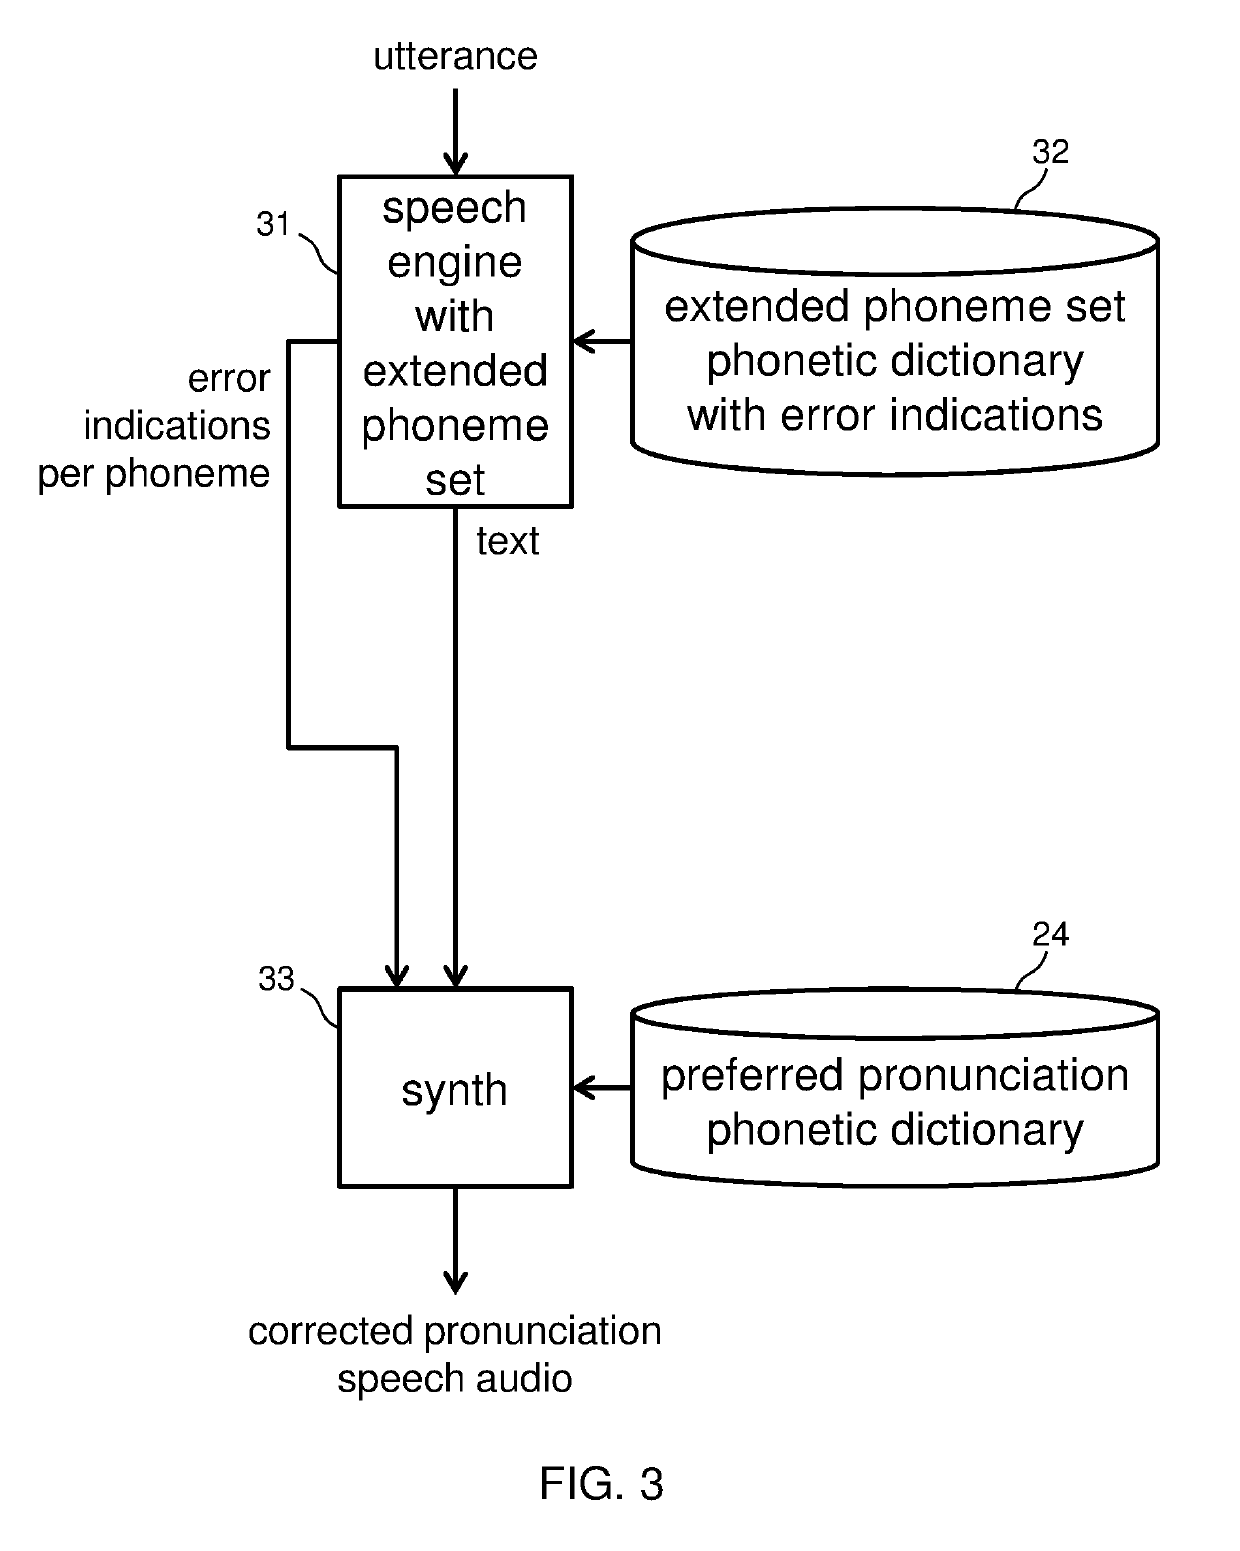 Pronunciation guided by automatic speech recognition